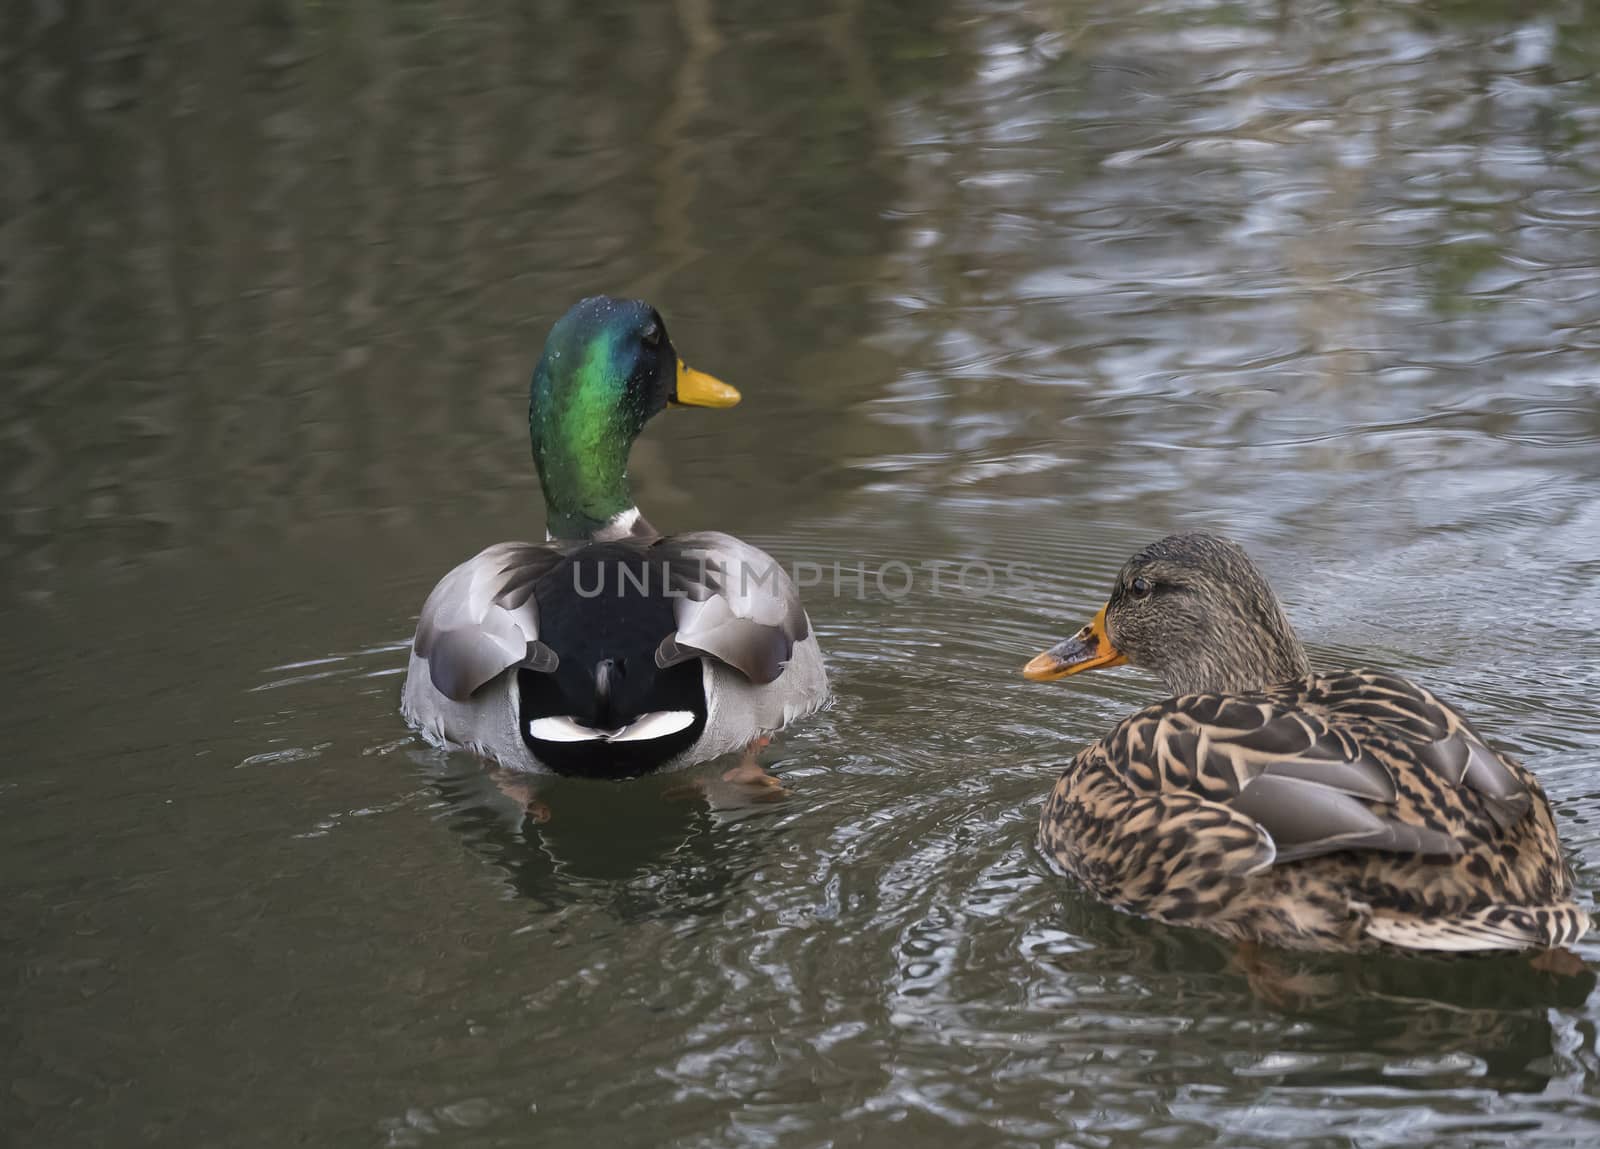 Close up mallard couple, Anas platyrhynchos, male and female duck swimming on water suface with grass, stone and dirt. Selective focus.